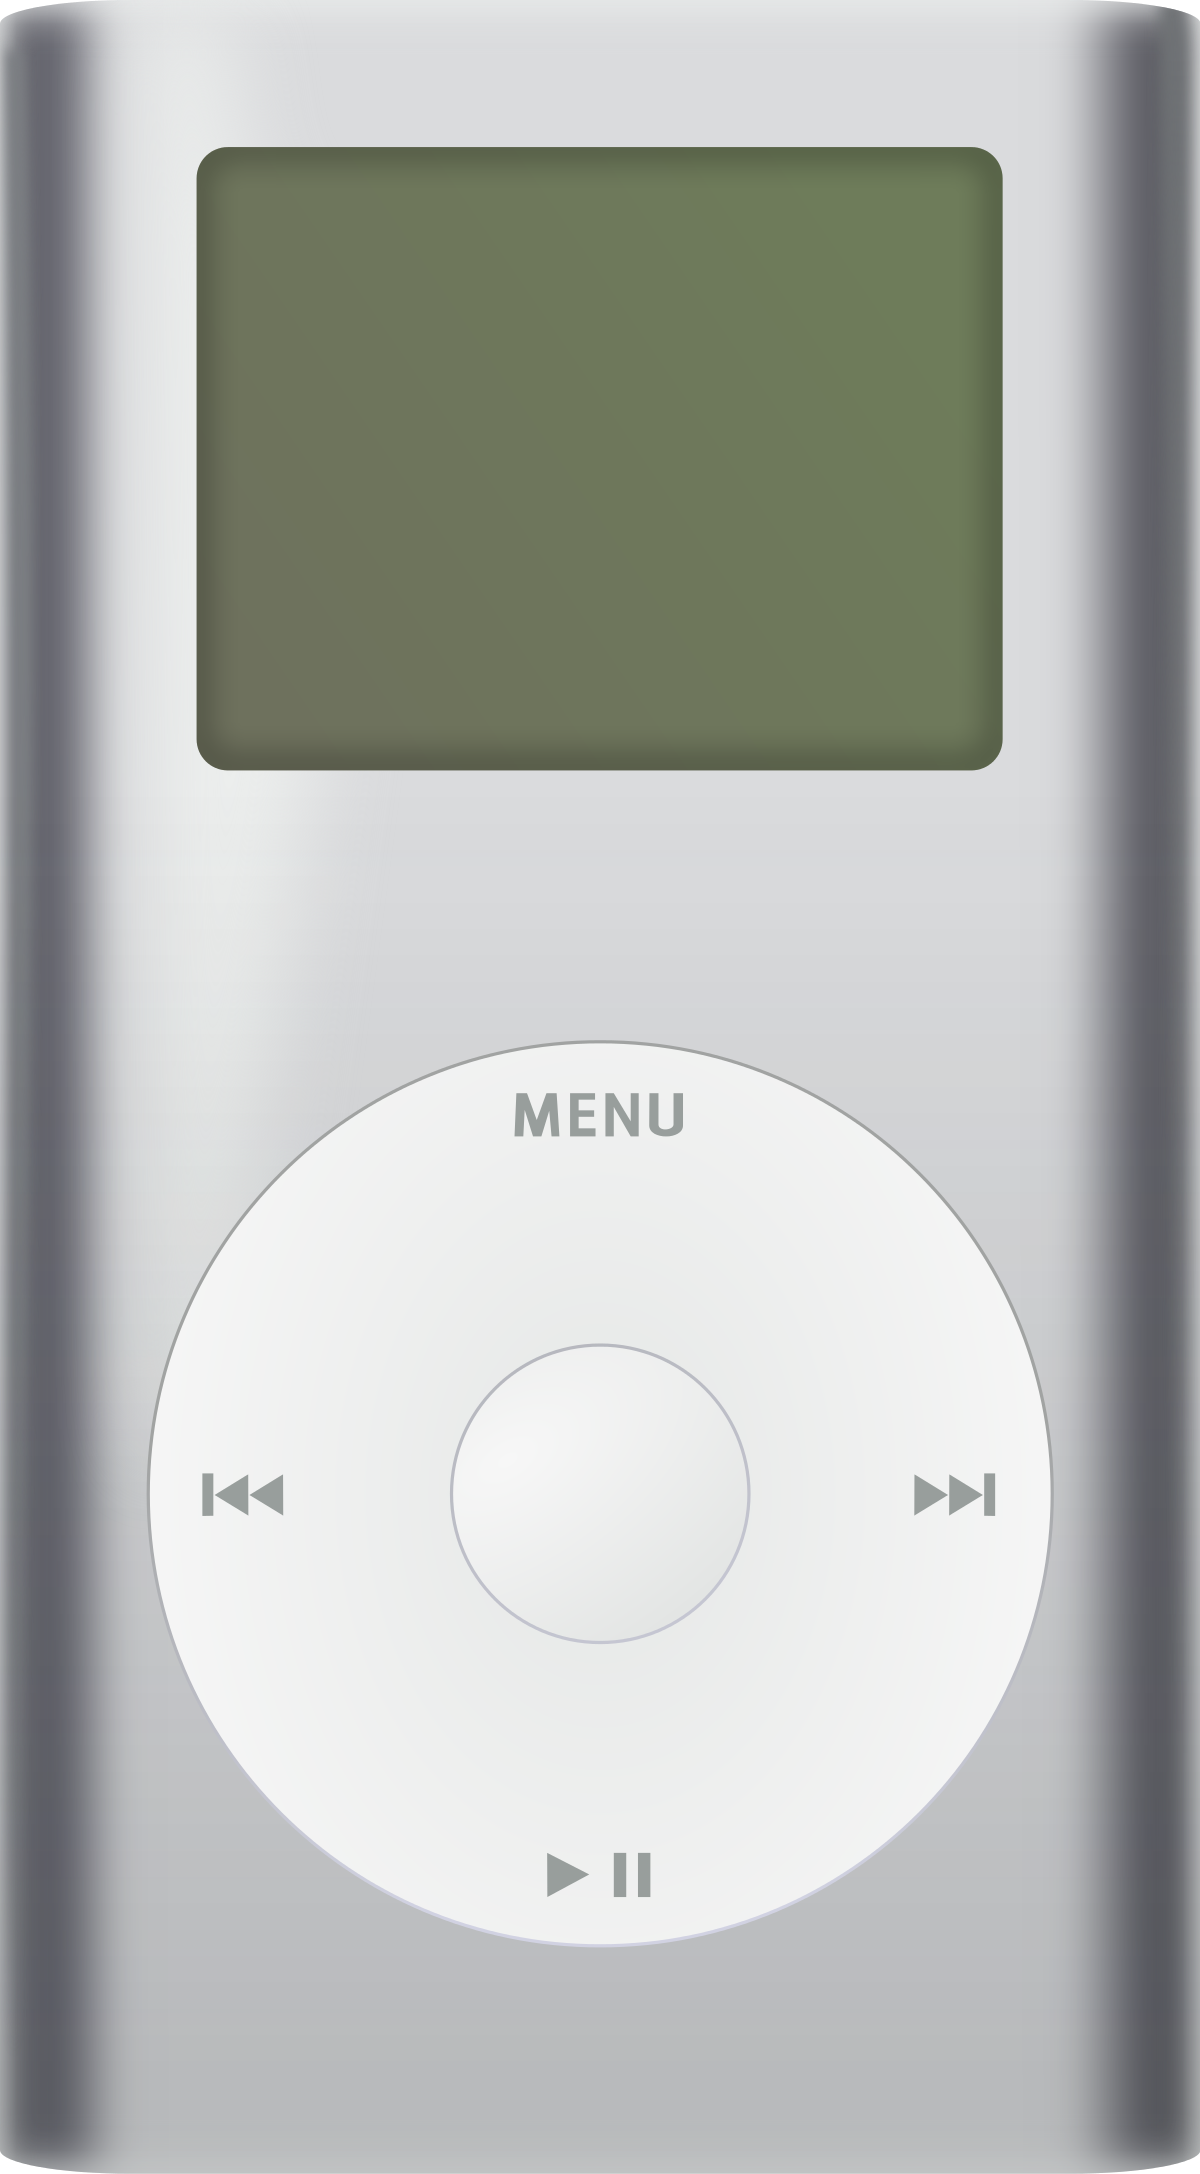 first ipod png